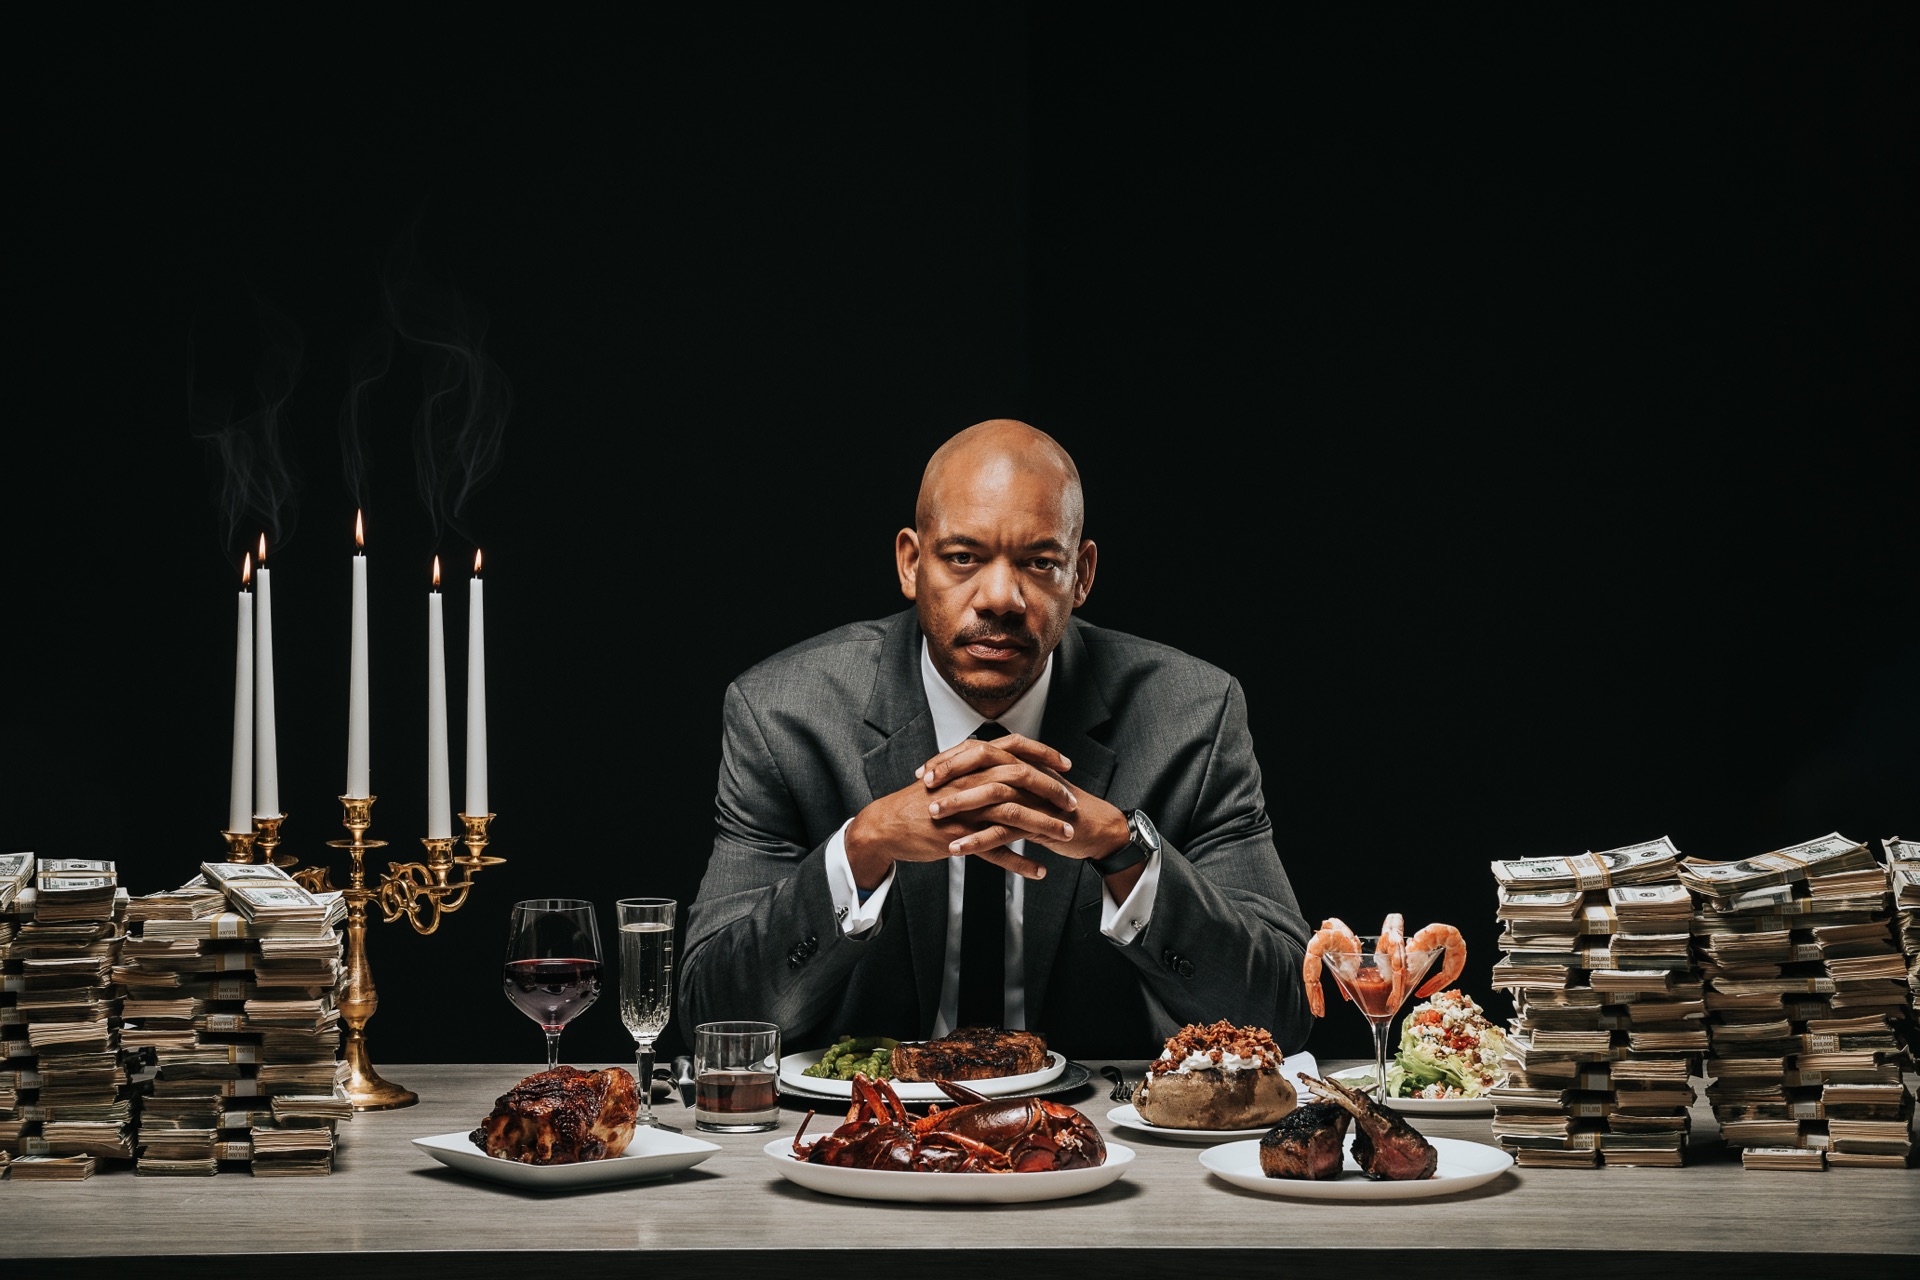 C&I Studios Blog African American male at a table surrounded by exotic foods, cash and a candelabra with lit candles.